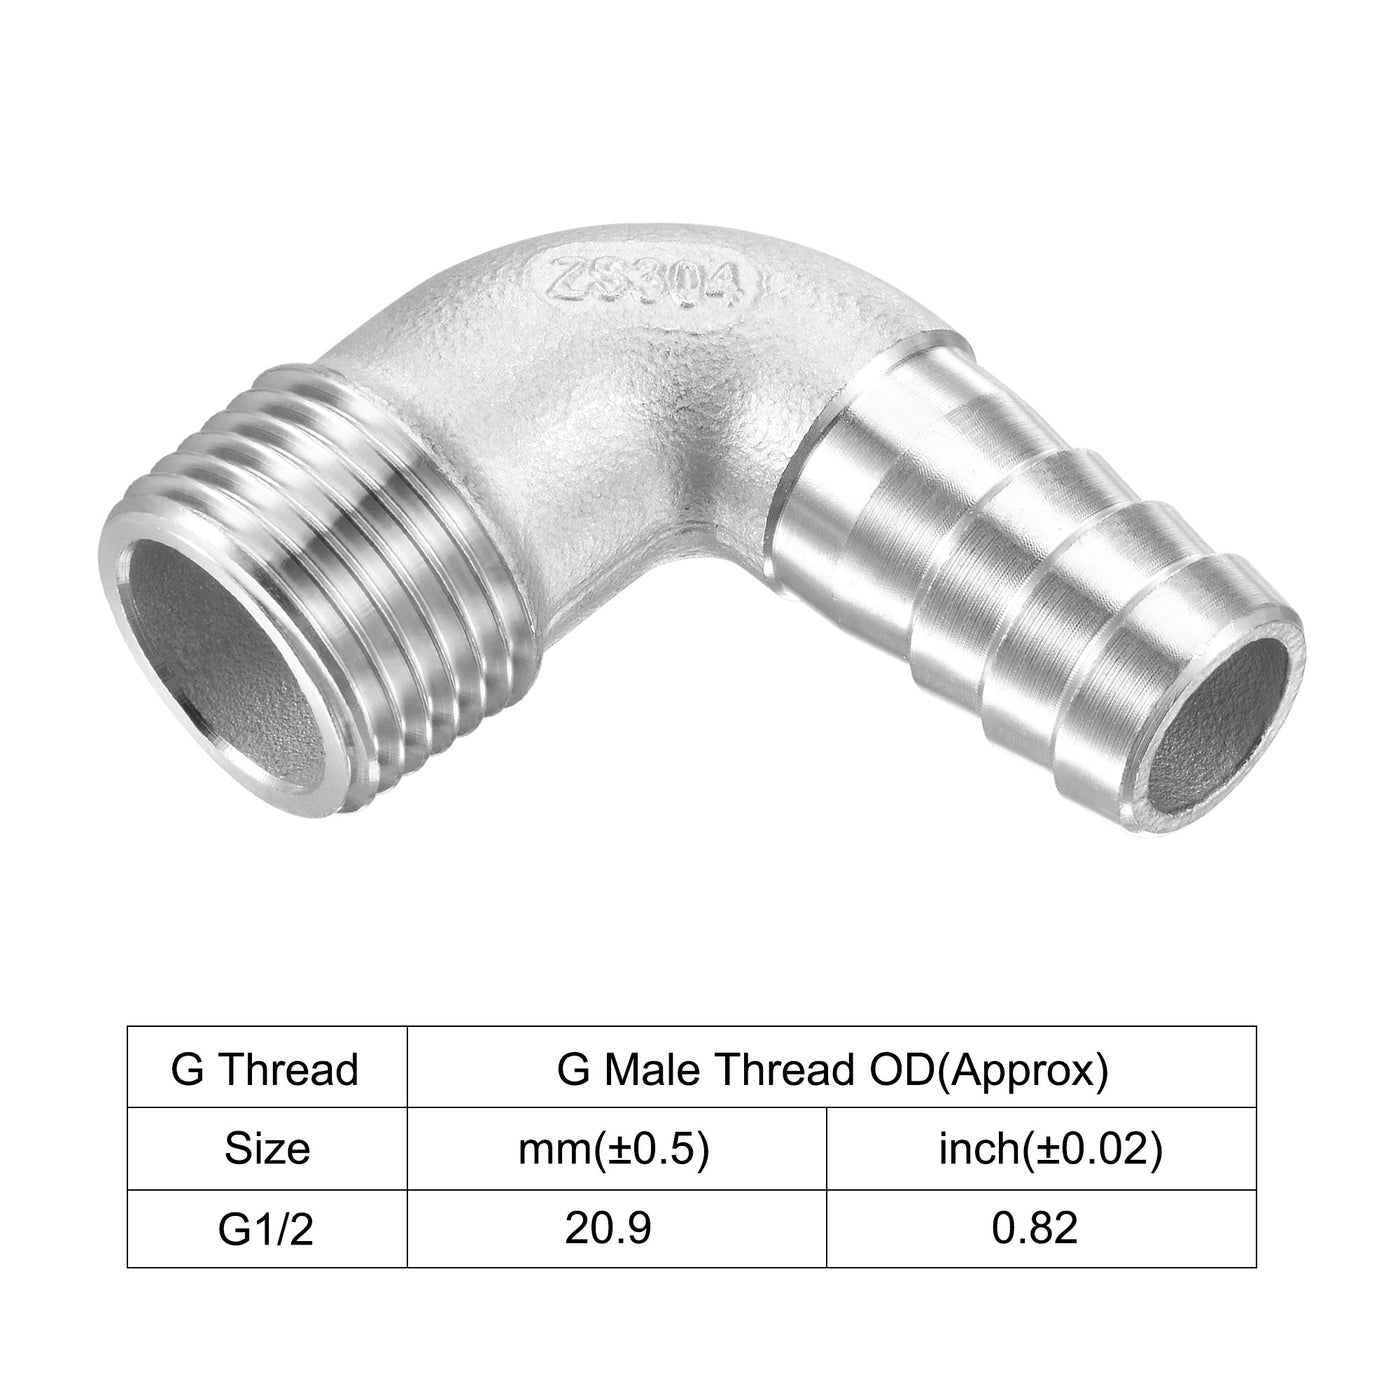 Uxcell Uxcell Stainless Steel Hose Barb Fitting Elbow 8mm x G1/2 Male Pipe Connector 2pcs